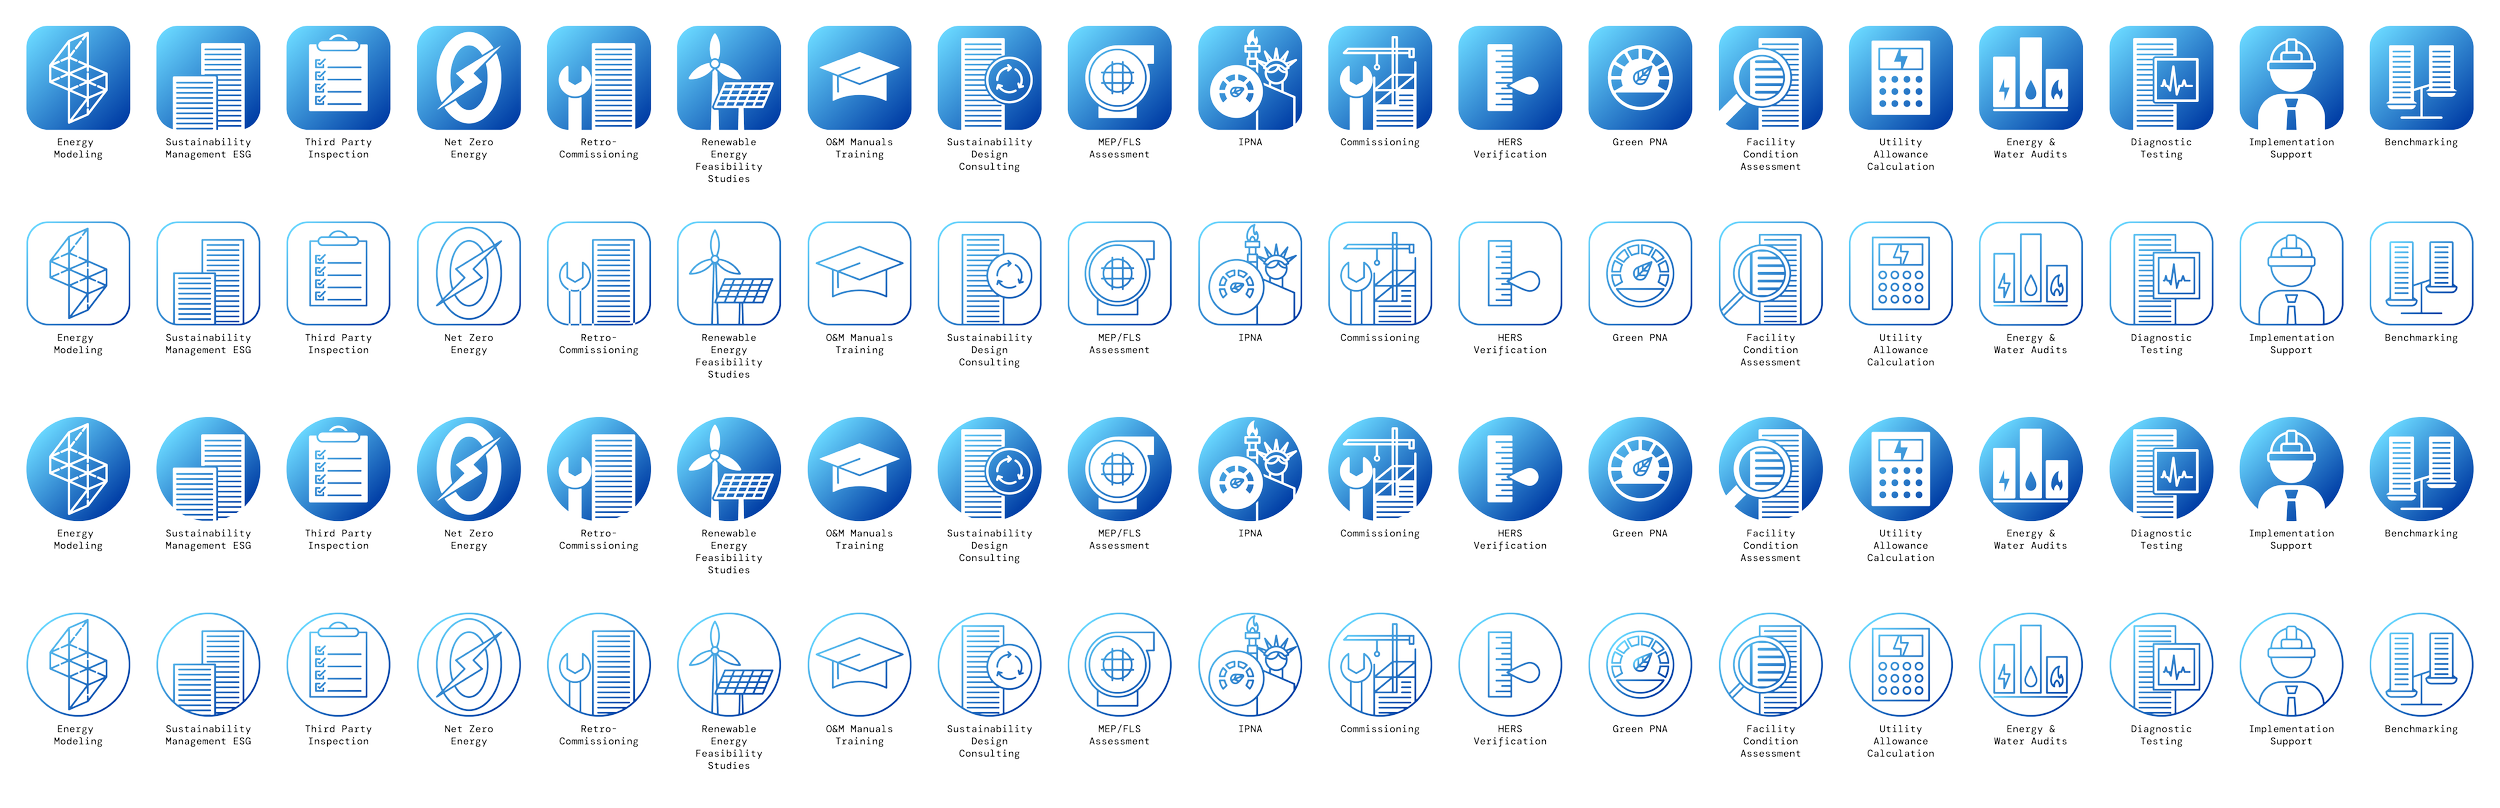 PTE Icons - Arranged-08.png